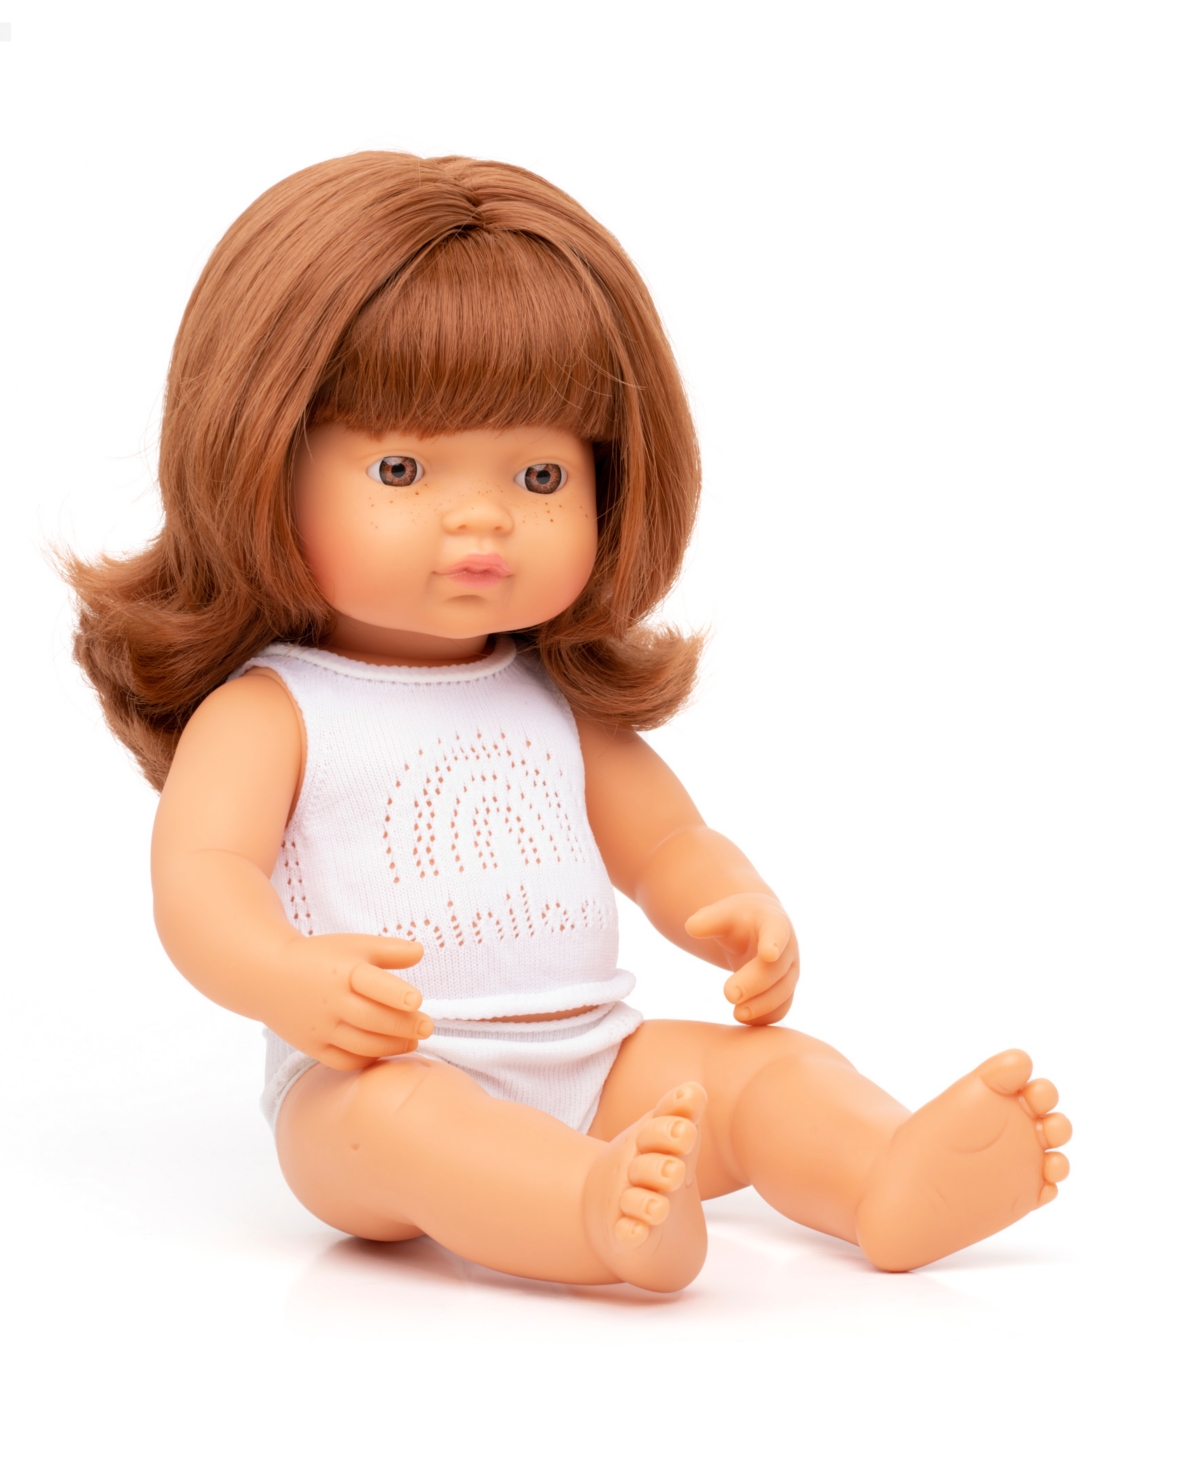 Miniland Kids' 15" Baby Doll Caucasian Redhead Girl Set , 3 Piece In No Color